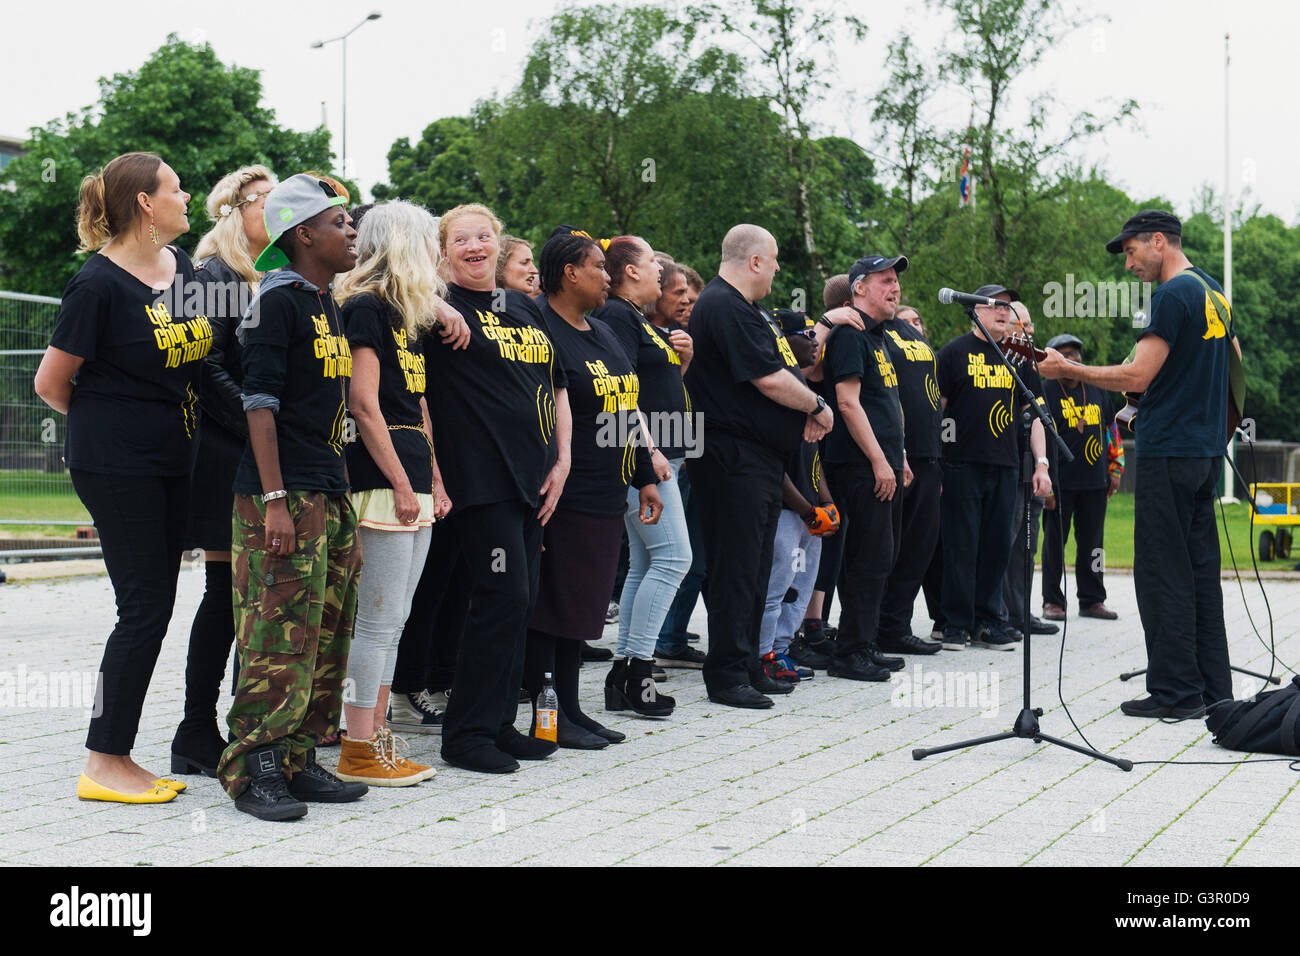 The Choir With No Name, formed of homeless and marginalised people, performs in Cardiff as part of the Wales Millennium Centre's Festival Of Voice. Stock Photo